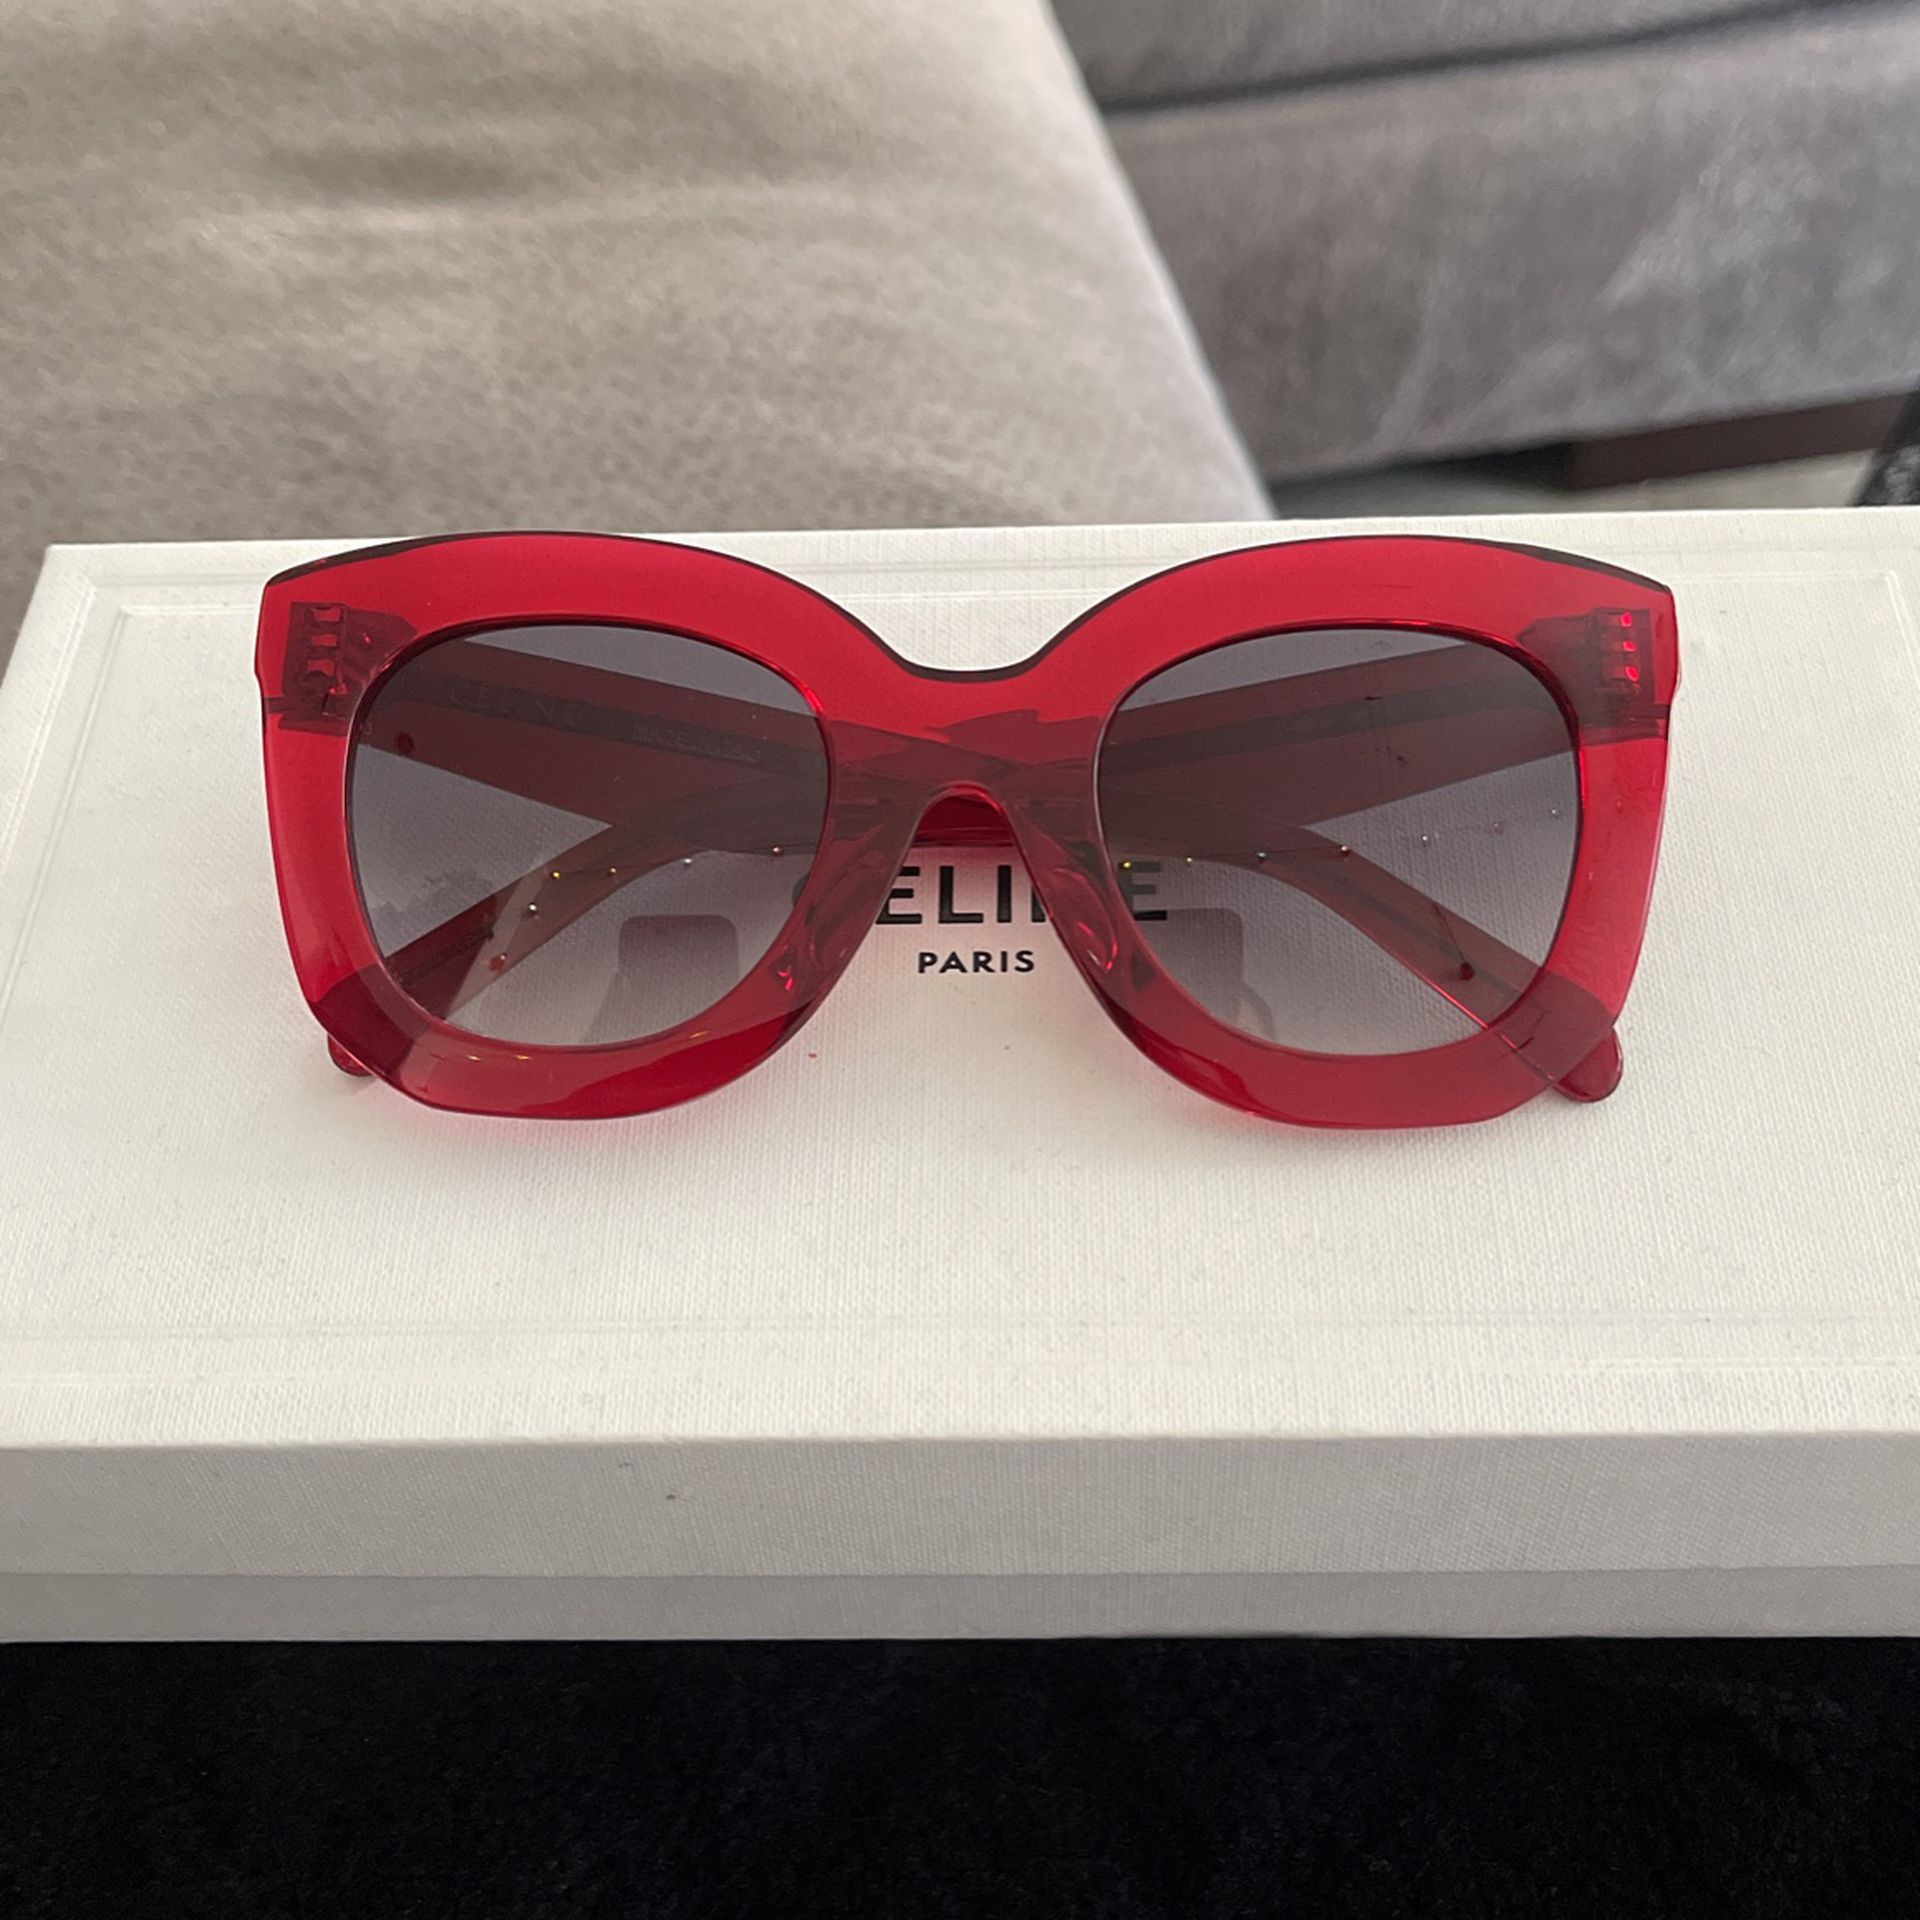 Celine Sunglasses for Sale in Los Angeles, CA - OfferUp